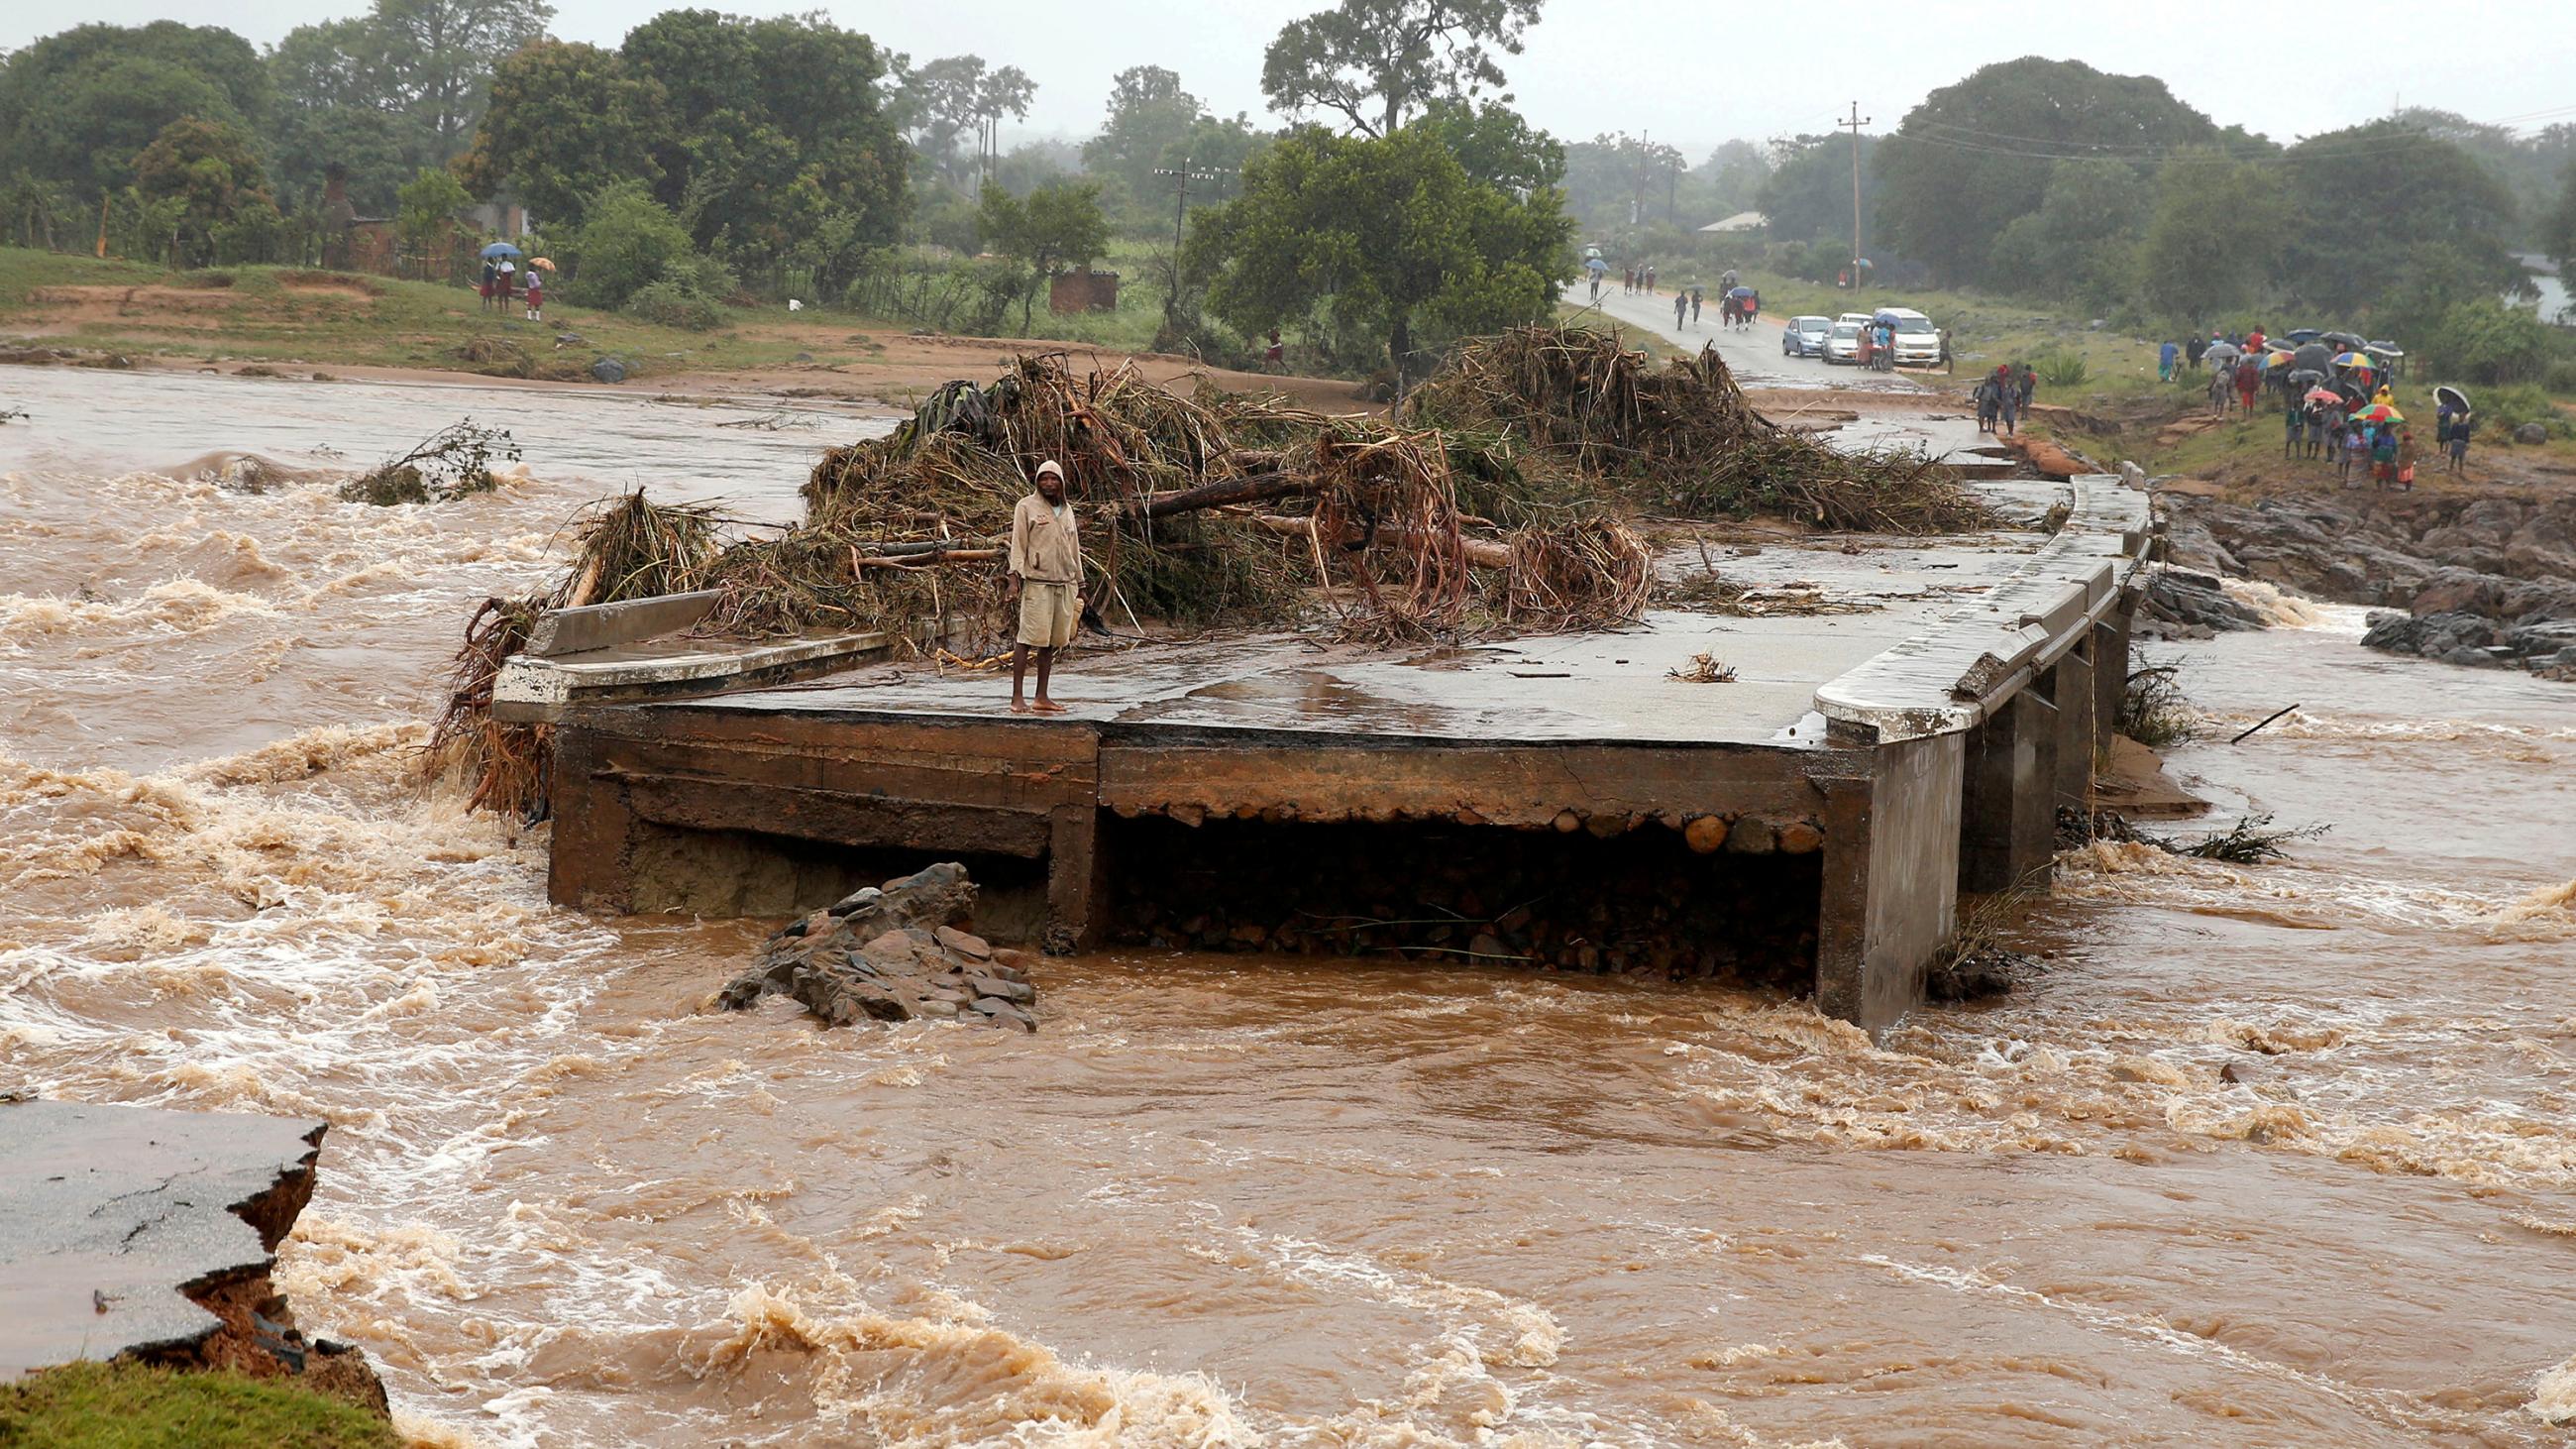 The photo shows a man at one end of a bridge that is completely washed away from the flooding. 